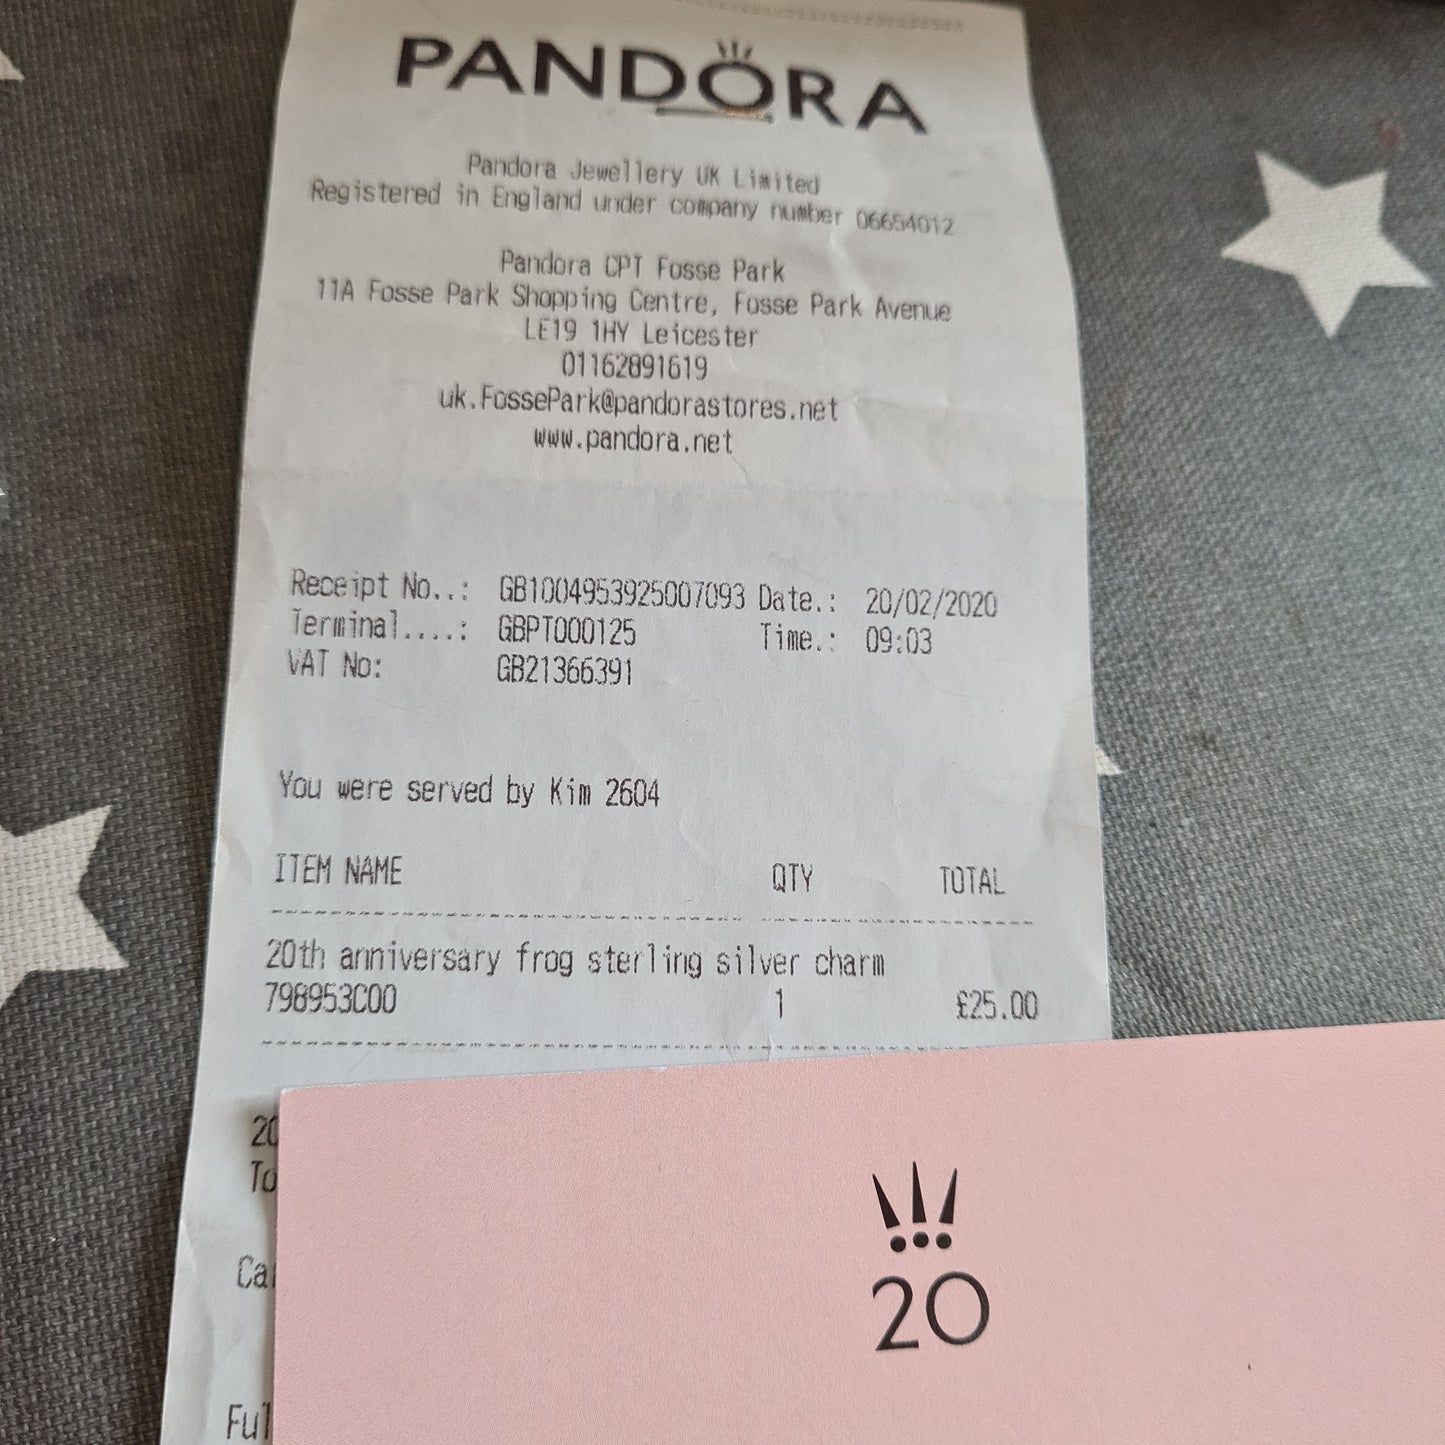 Genuine Pandora 20th Anniversary Frog With Certificate and No.2 February